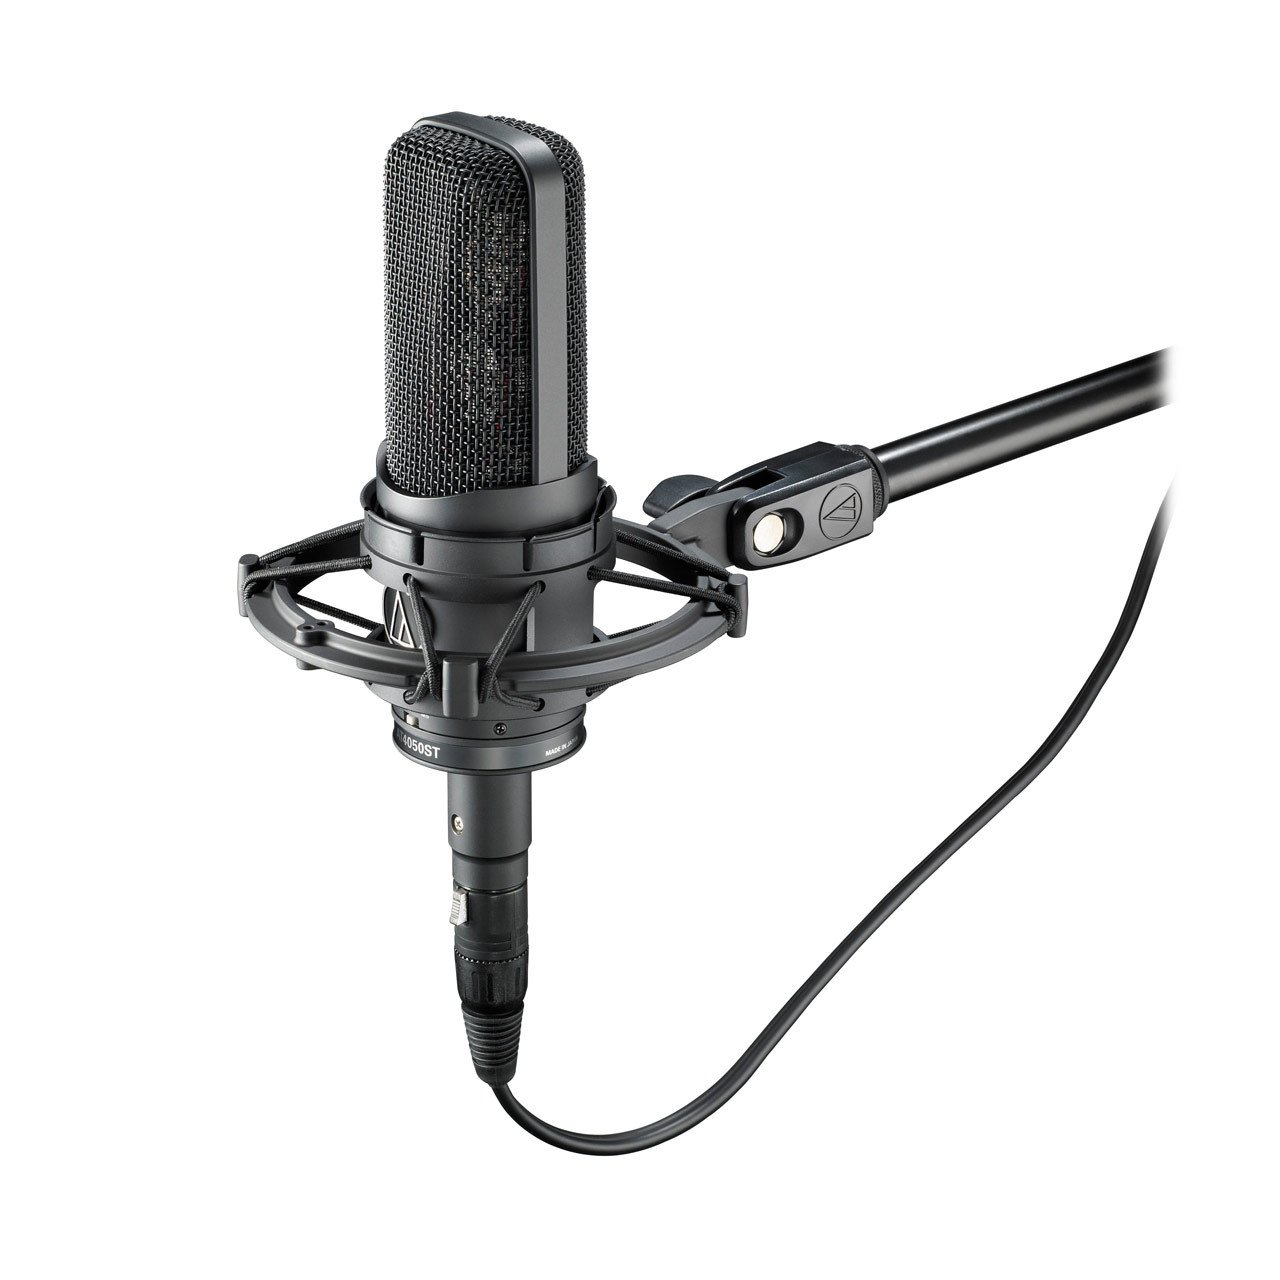 Condenser Microphones - Audio-Technica AT4050ST - Stereo Version Of AT4050